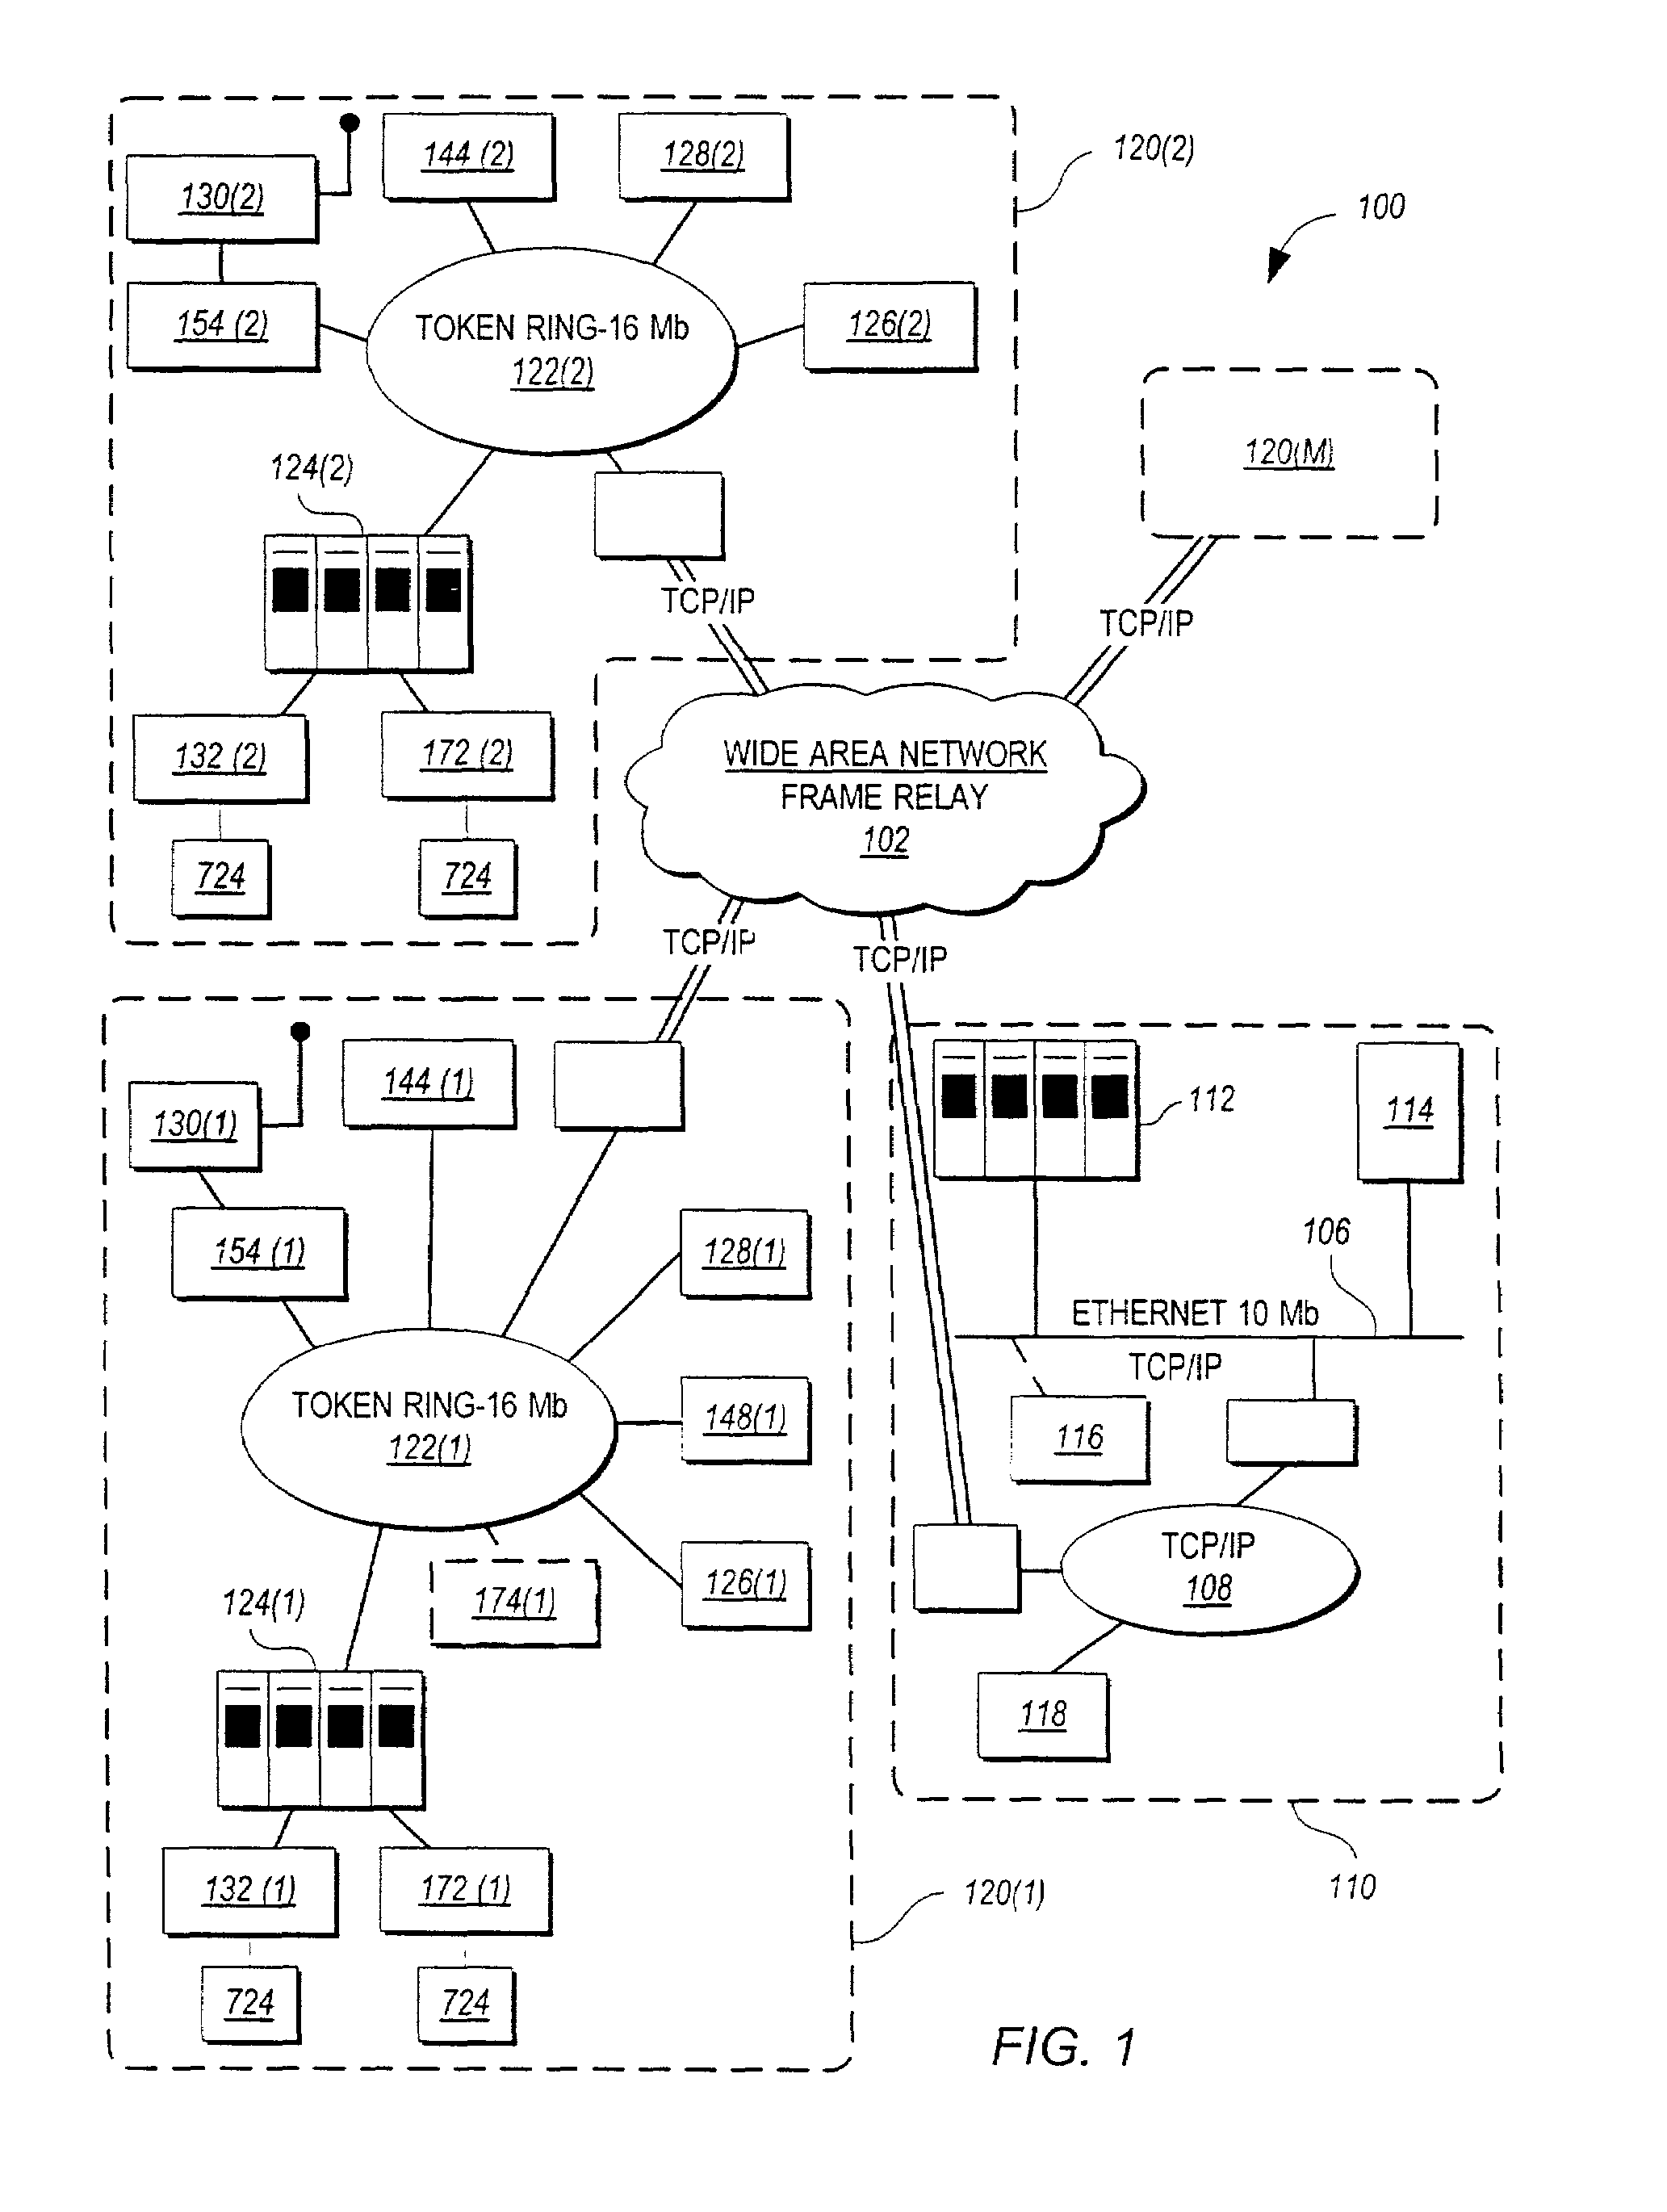 National customer recognition system and method